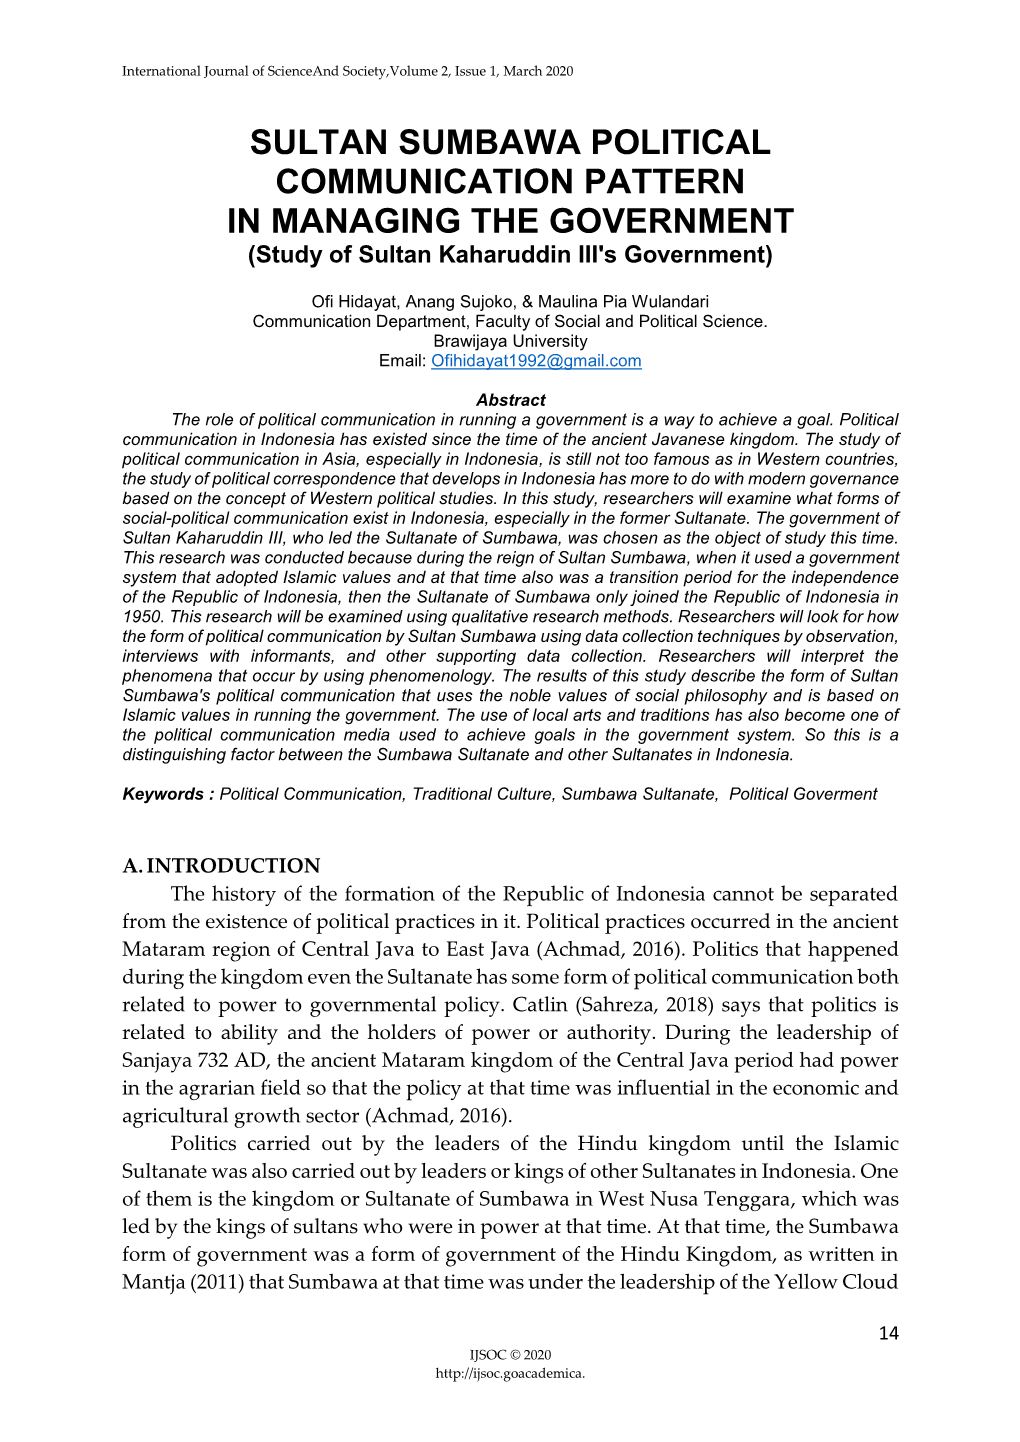 SULTAN SUMBAWA POLITICAL COMMUNICATION PATTERN in MANAGING the GOVERNMENT (Study of Sultan Kaharuddin III's Government)